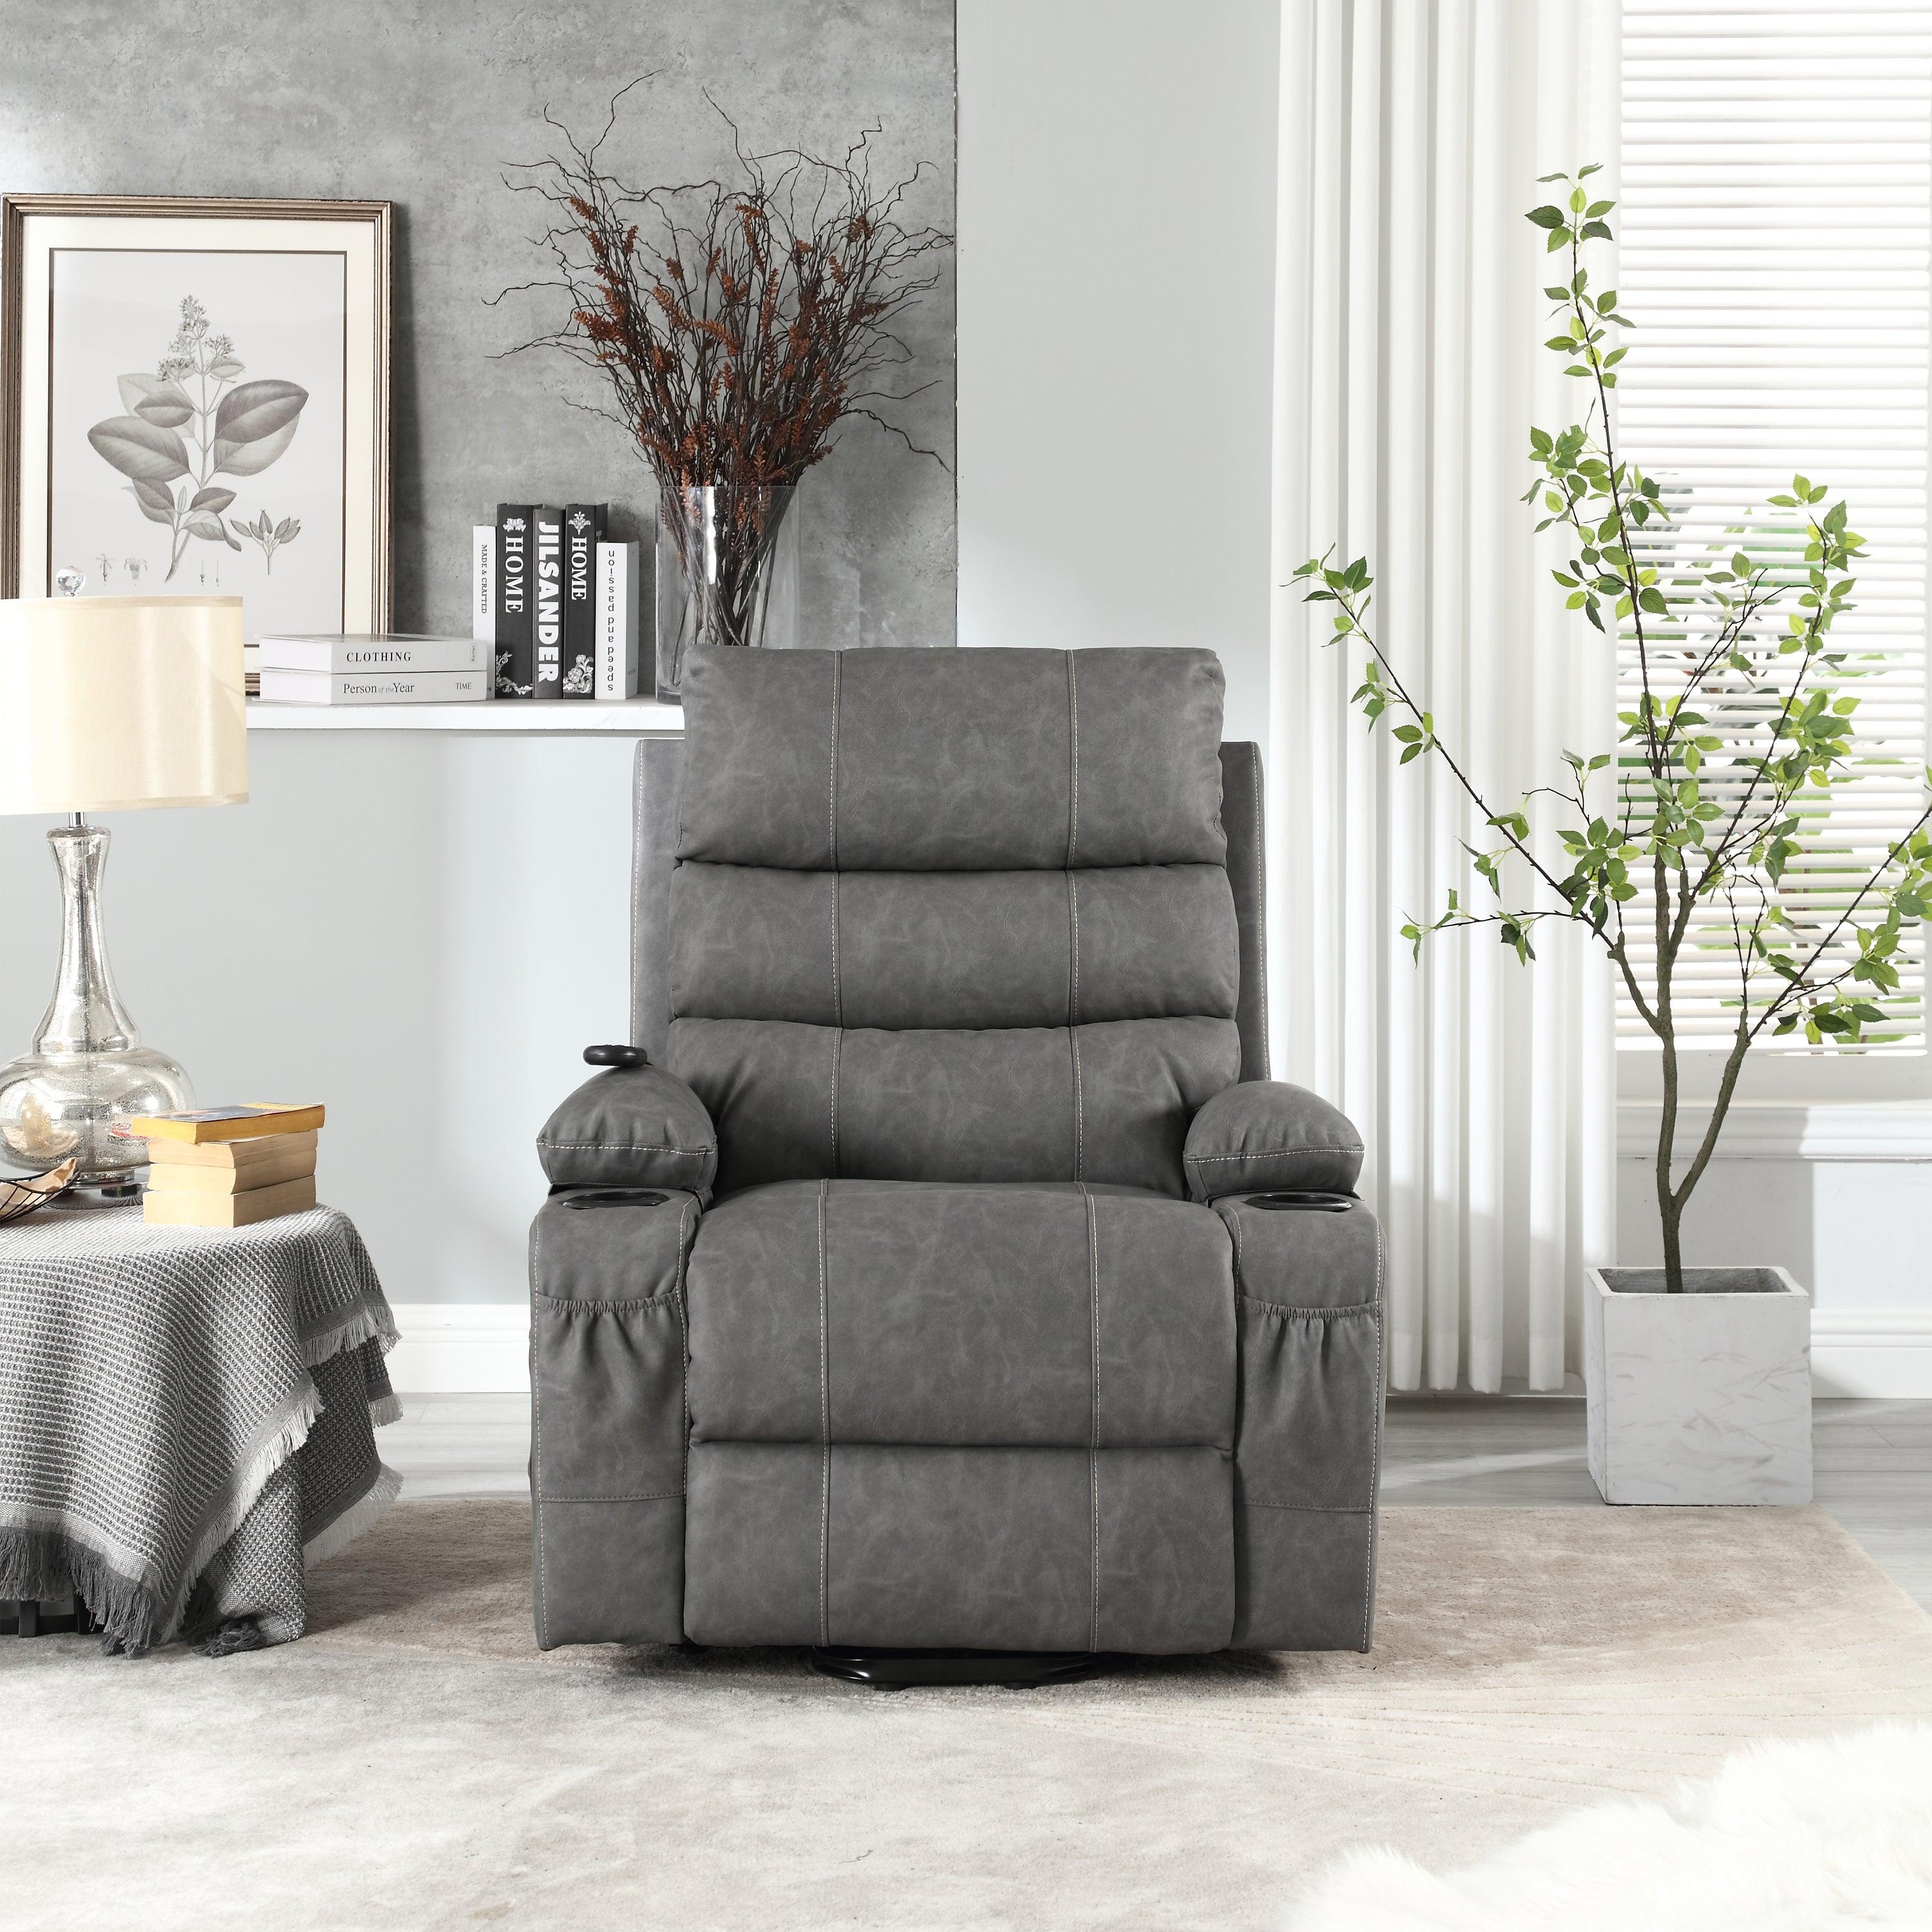 🆓🚛 21" Seat Width Electric Power Lift Recliner Chair Sofa for Elderly, 8 Point Vibration Massage & Lumber Heat, Remote Control, Side Pockets & Cup Holders, Gray